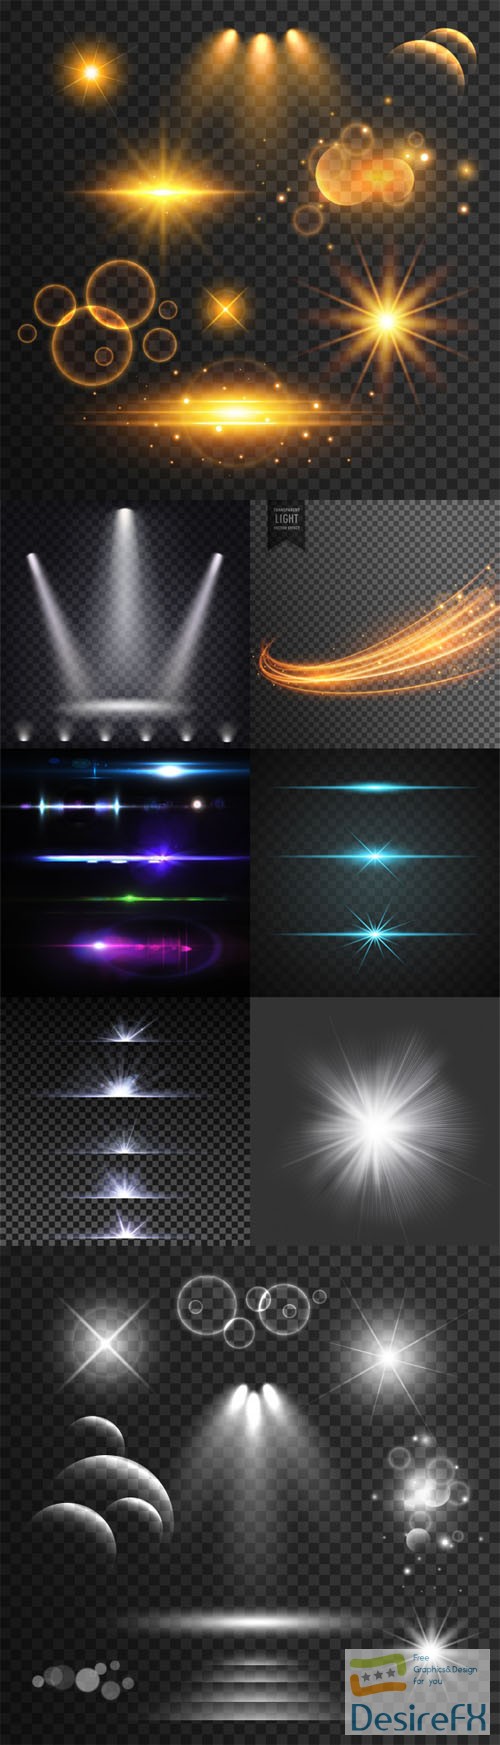 Light Effects Collection in [Ai/EPS/PSD]